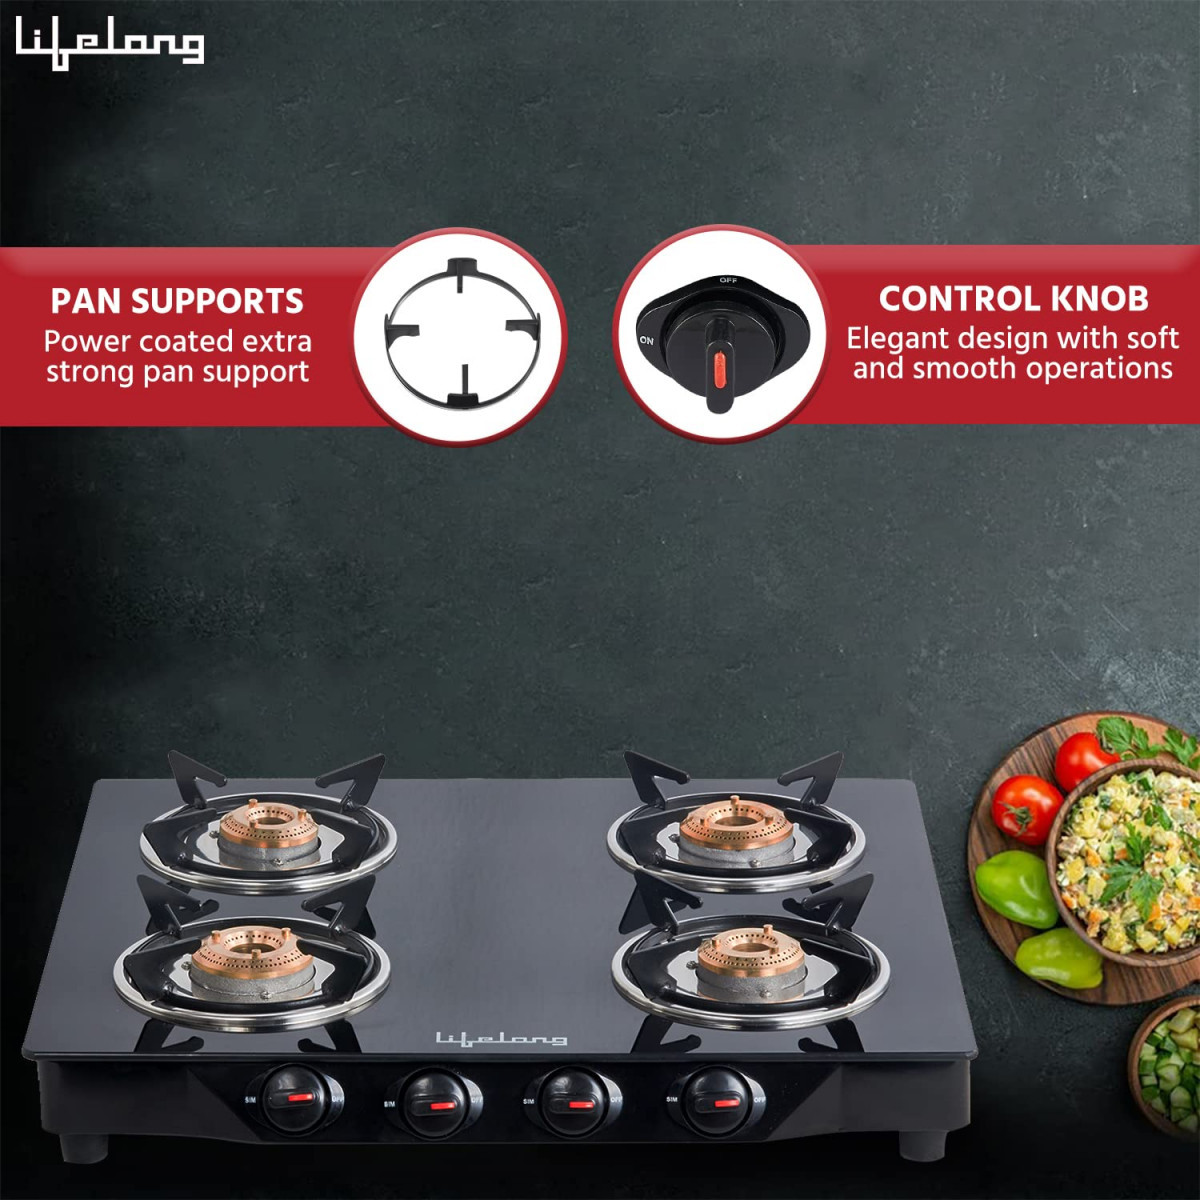 Lifelong 4 Burner Gas Stove Top for Kitchen - Manual Ignition Cooktop Modern Glass Stove for Modular Kitchen with Toughened Glass ISI Certified  Compatible with LPG - 1 Year Manufacturer039s Black